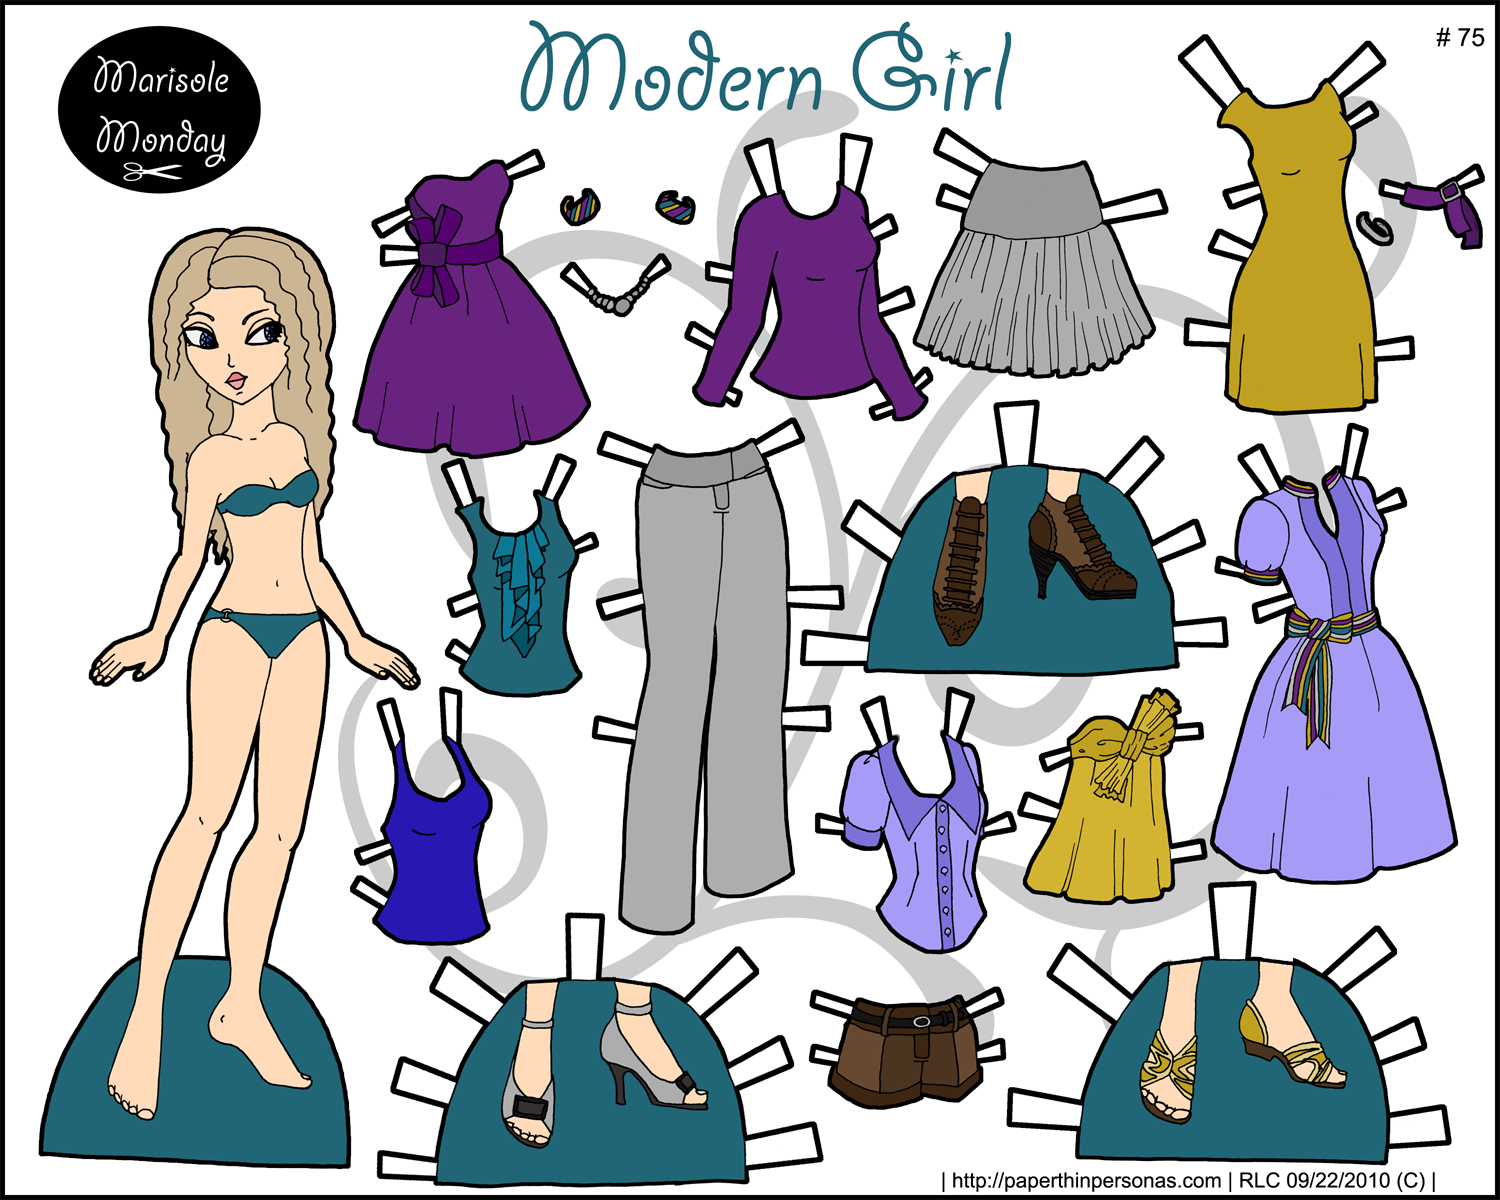 https://paperthinpersonas.com/wp-content/uploads/2016/01/paper-doll-marisole-tailored-150.png